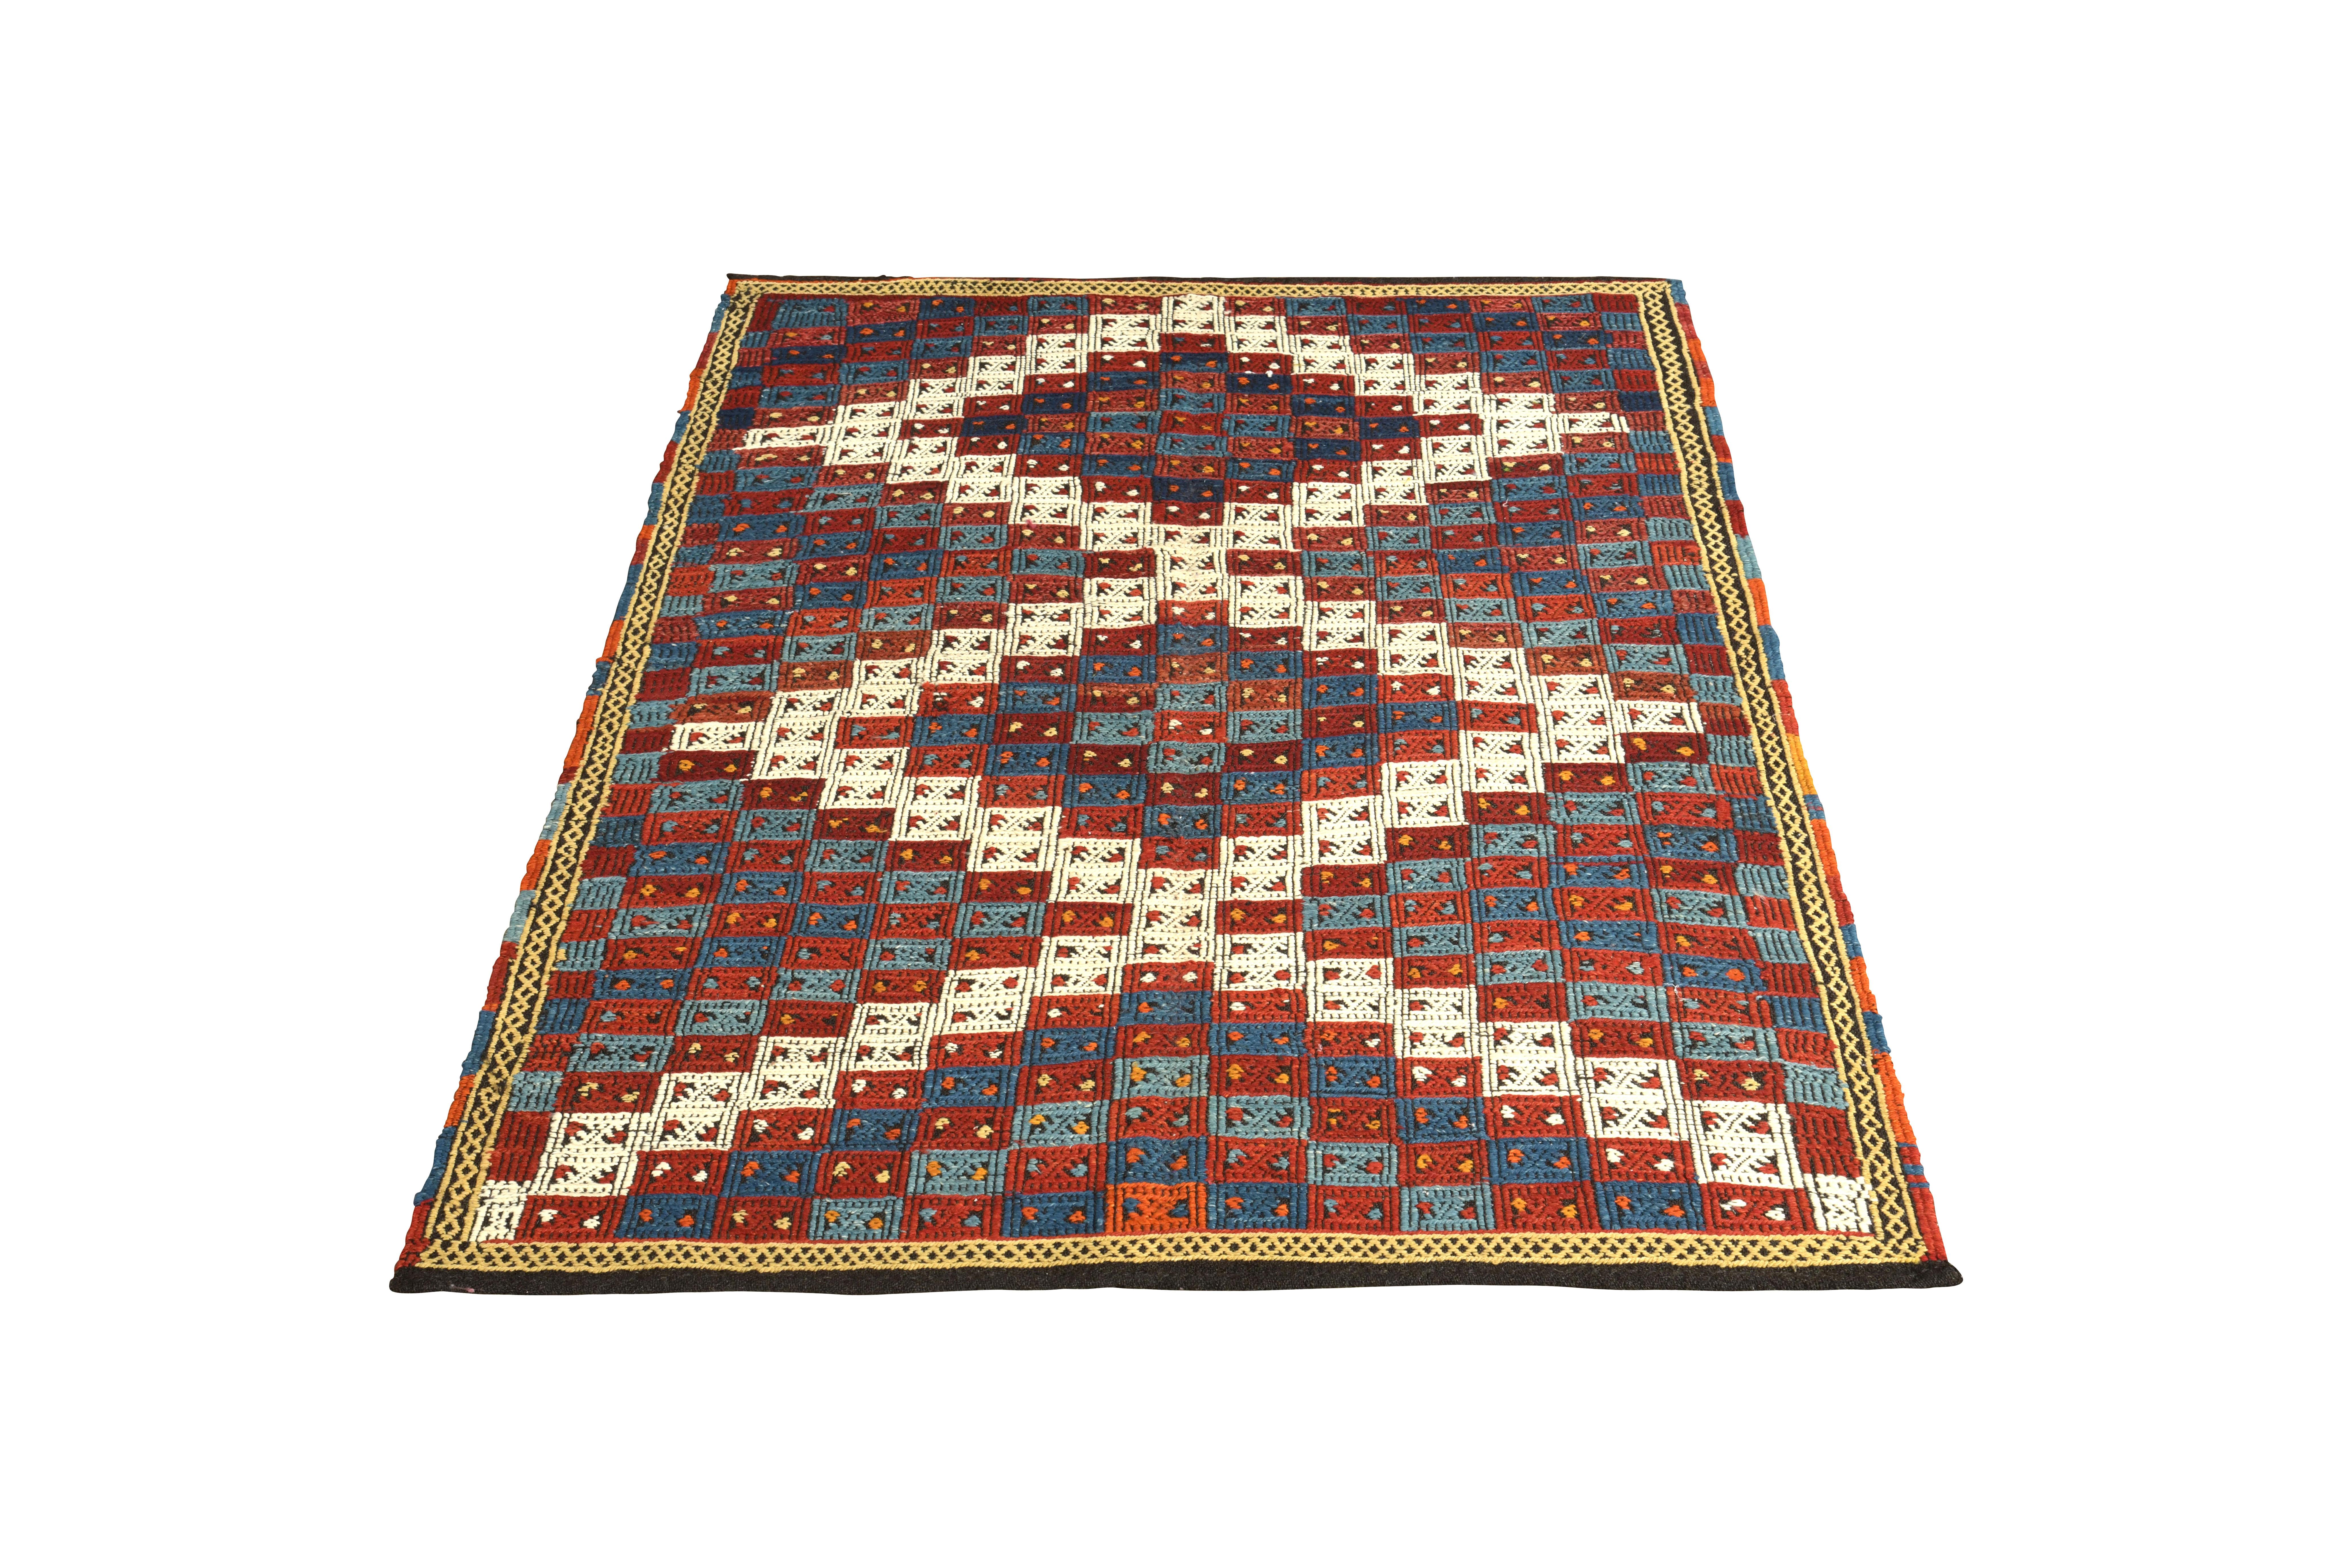 Handwoven in wool originating from Turkey circa 1950-1960, this vintage Kilim rug is celebrated in our collection as one of the finest of its kind, a very discerning play of flat-weave and embroidery techniques offering this inviting all-over